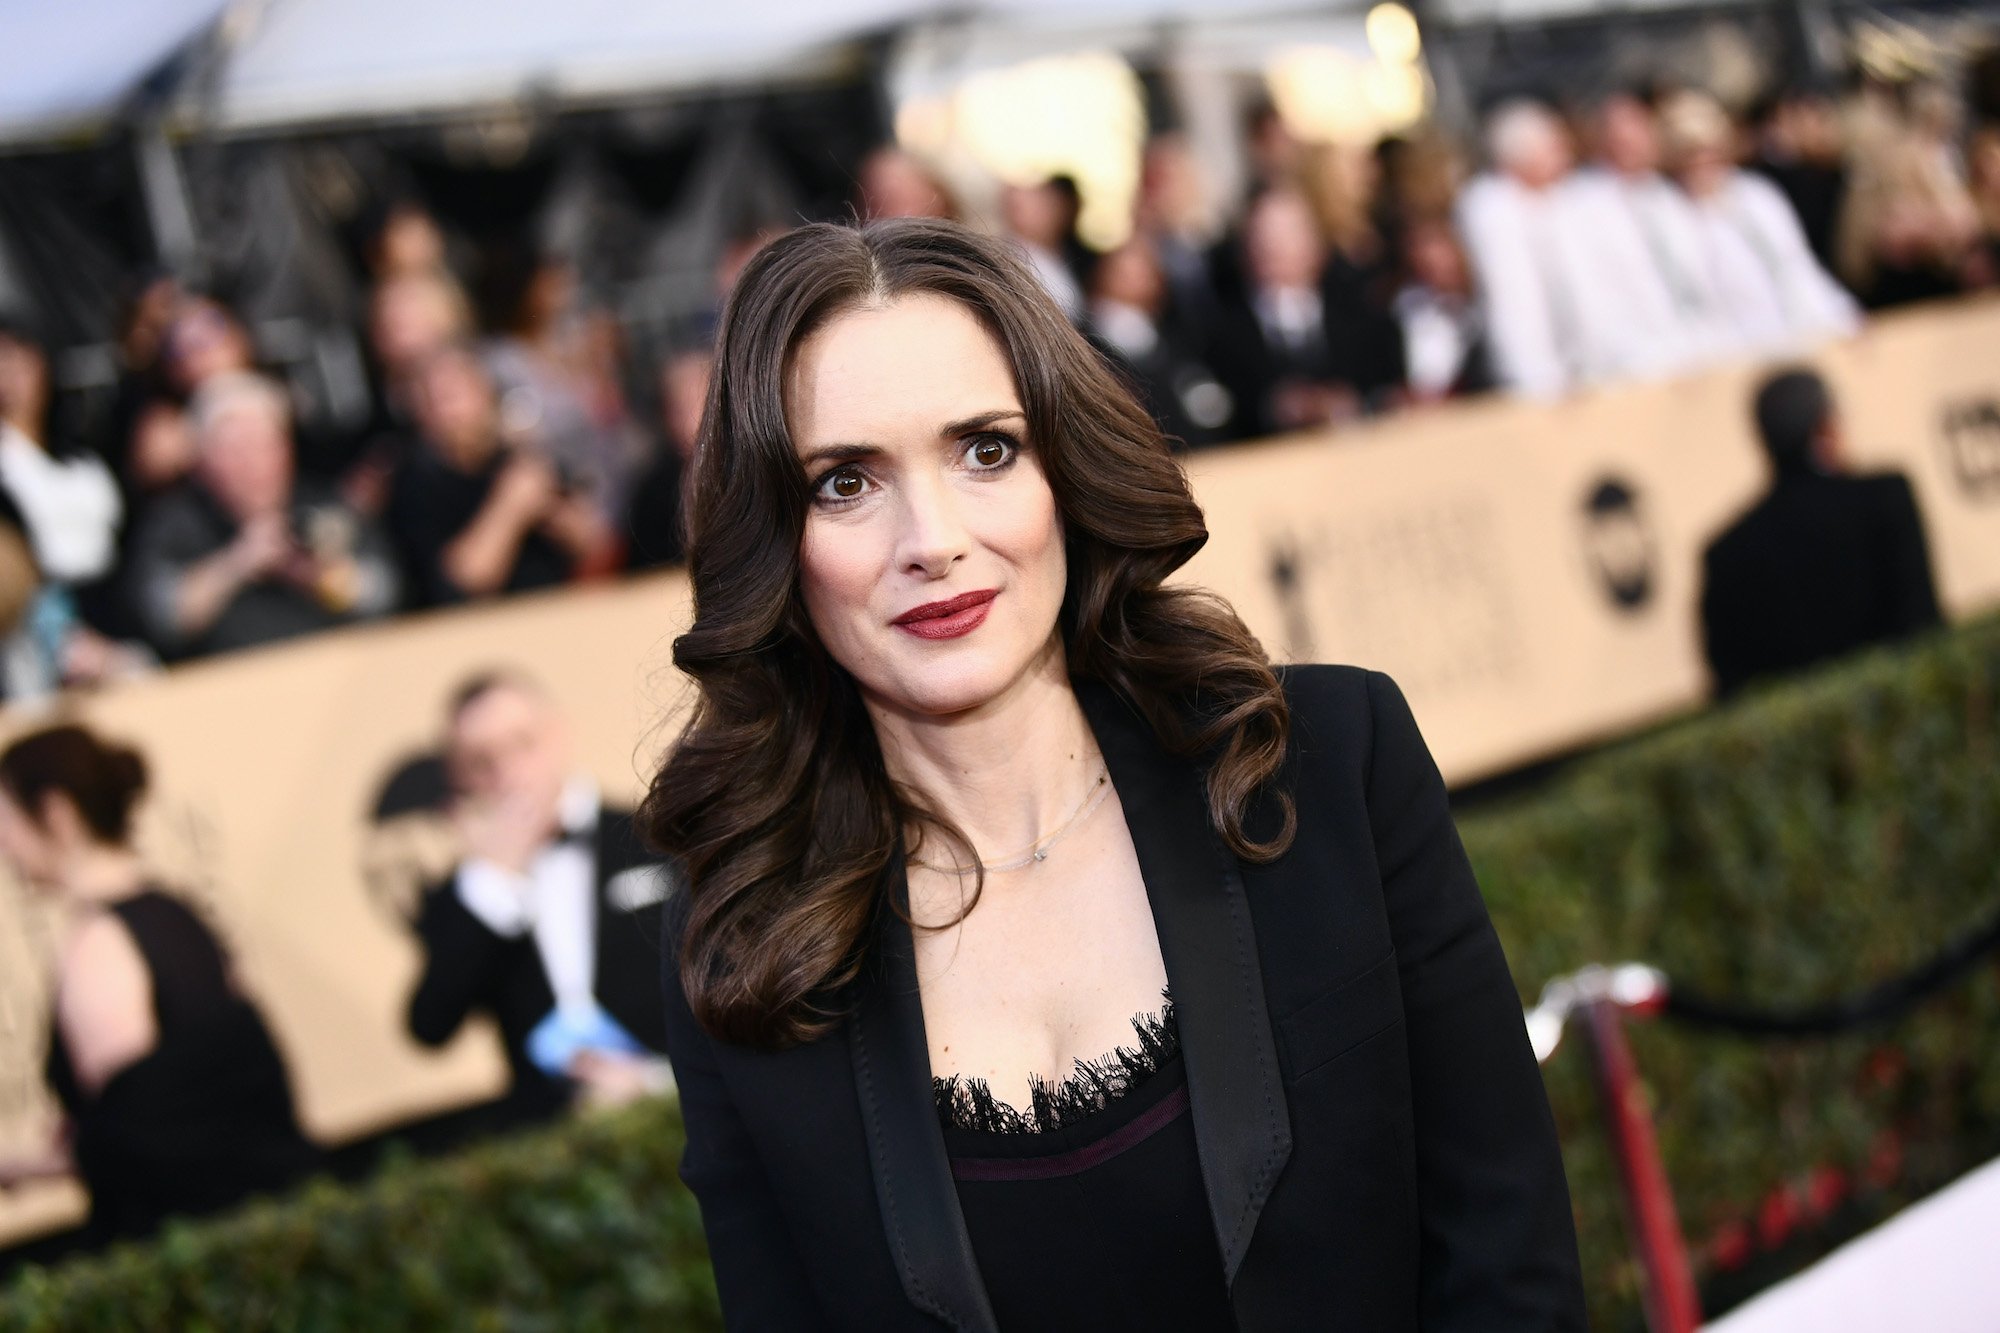 Winona Ryder smiling in front of a blurred crowd